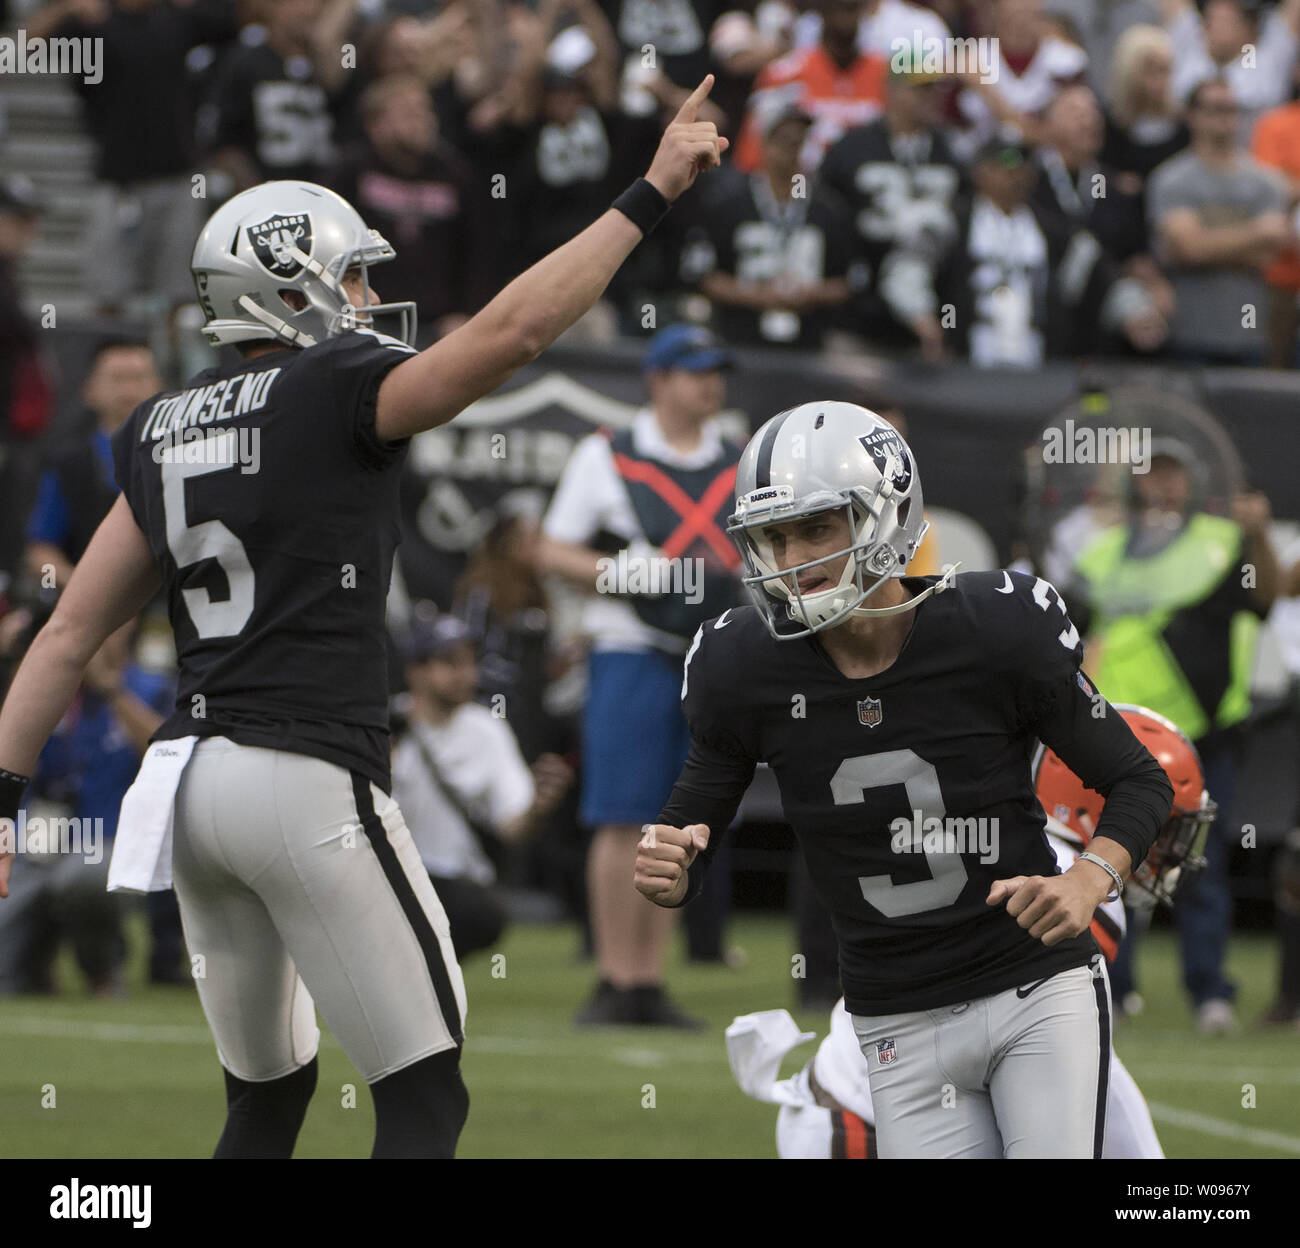 Oakland Raiders kicker Matt McGrane (3) celebrates as holder Johnny Townsend  raises a hand after kicking a 29 yrd field goal to defeate the Cleveland Browns in overtime at the Coliseum in Oakland, California on September 30, 2018. The Raiders won 45-42.     Photo by Terry Schmitt/UPI Stock Photo